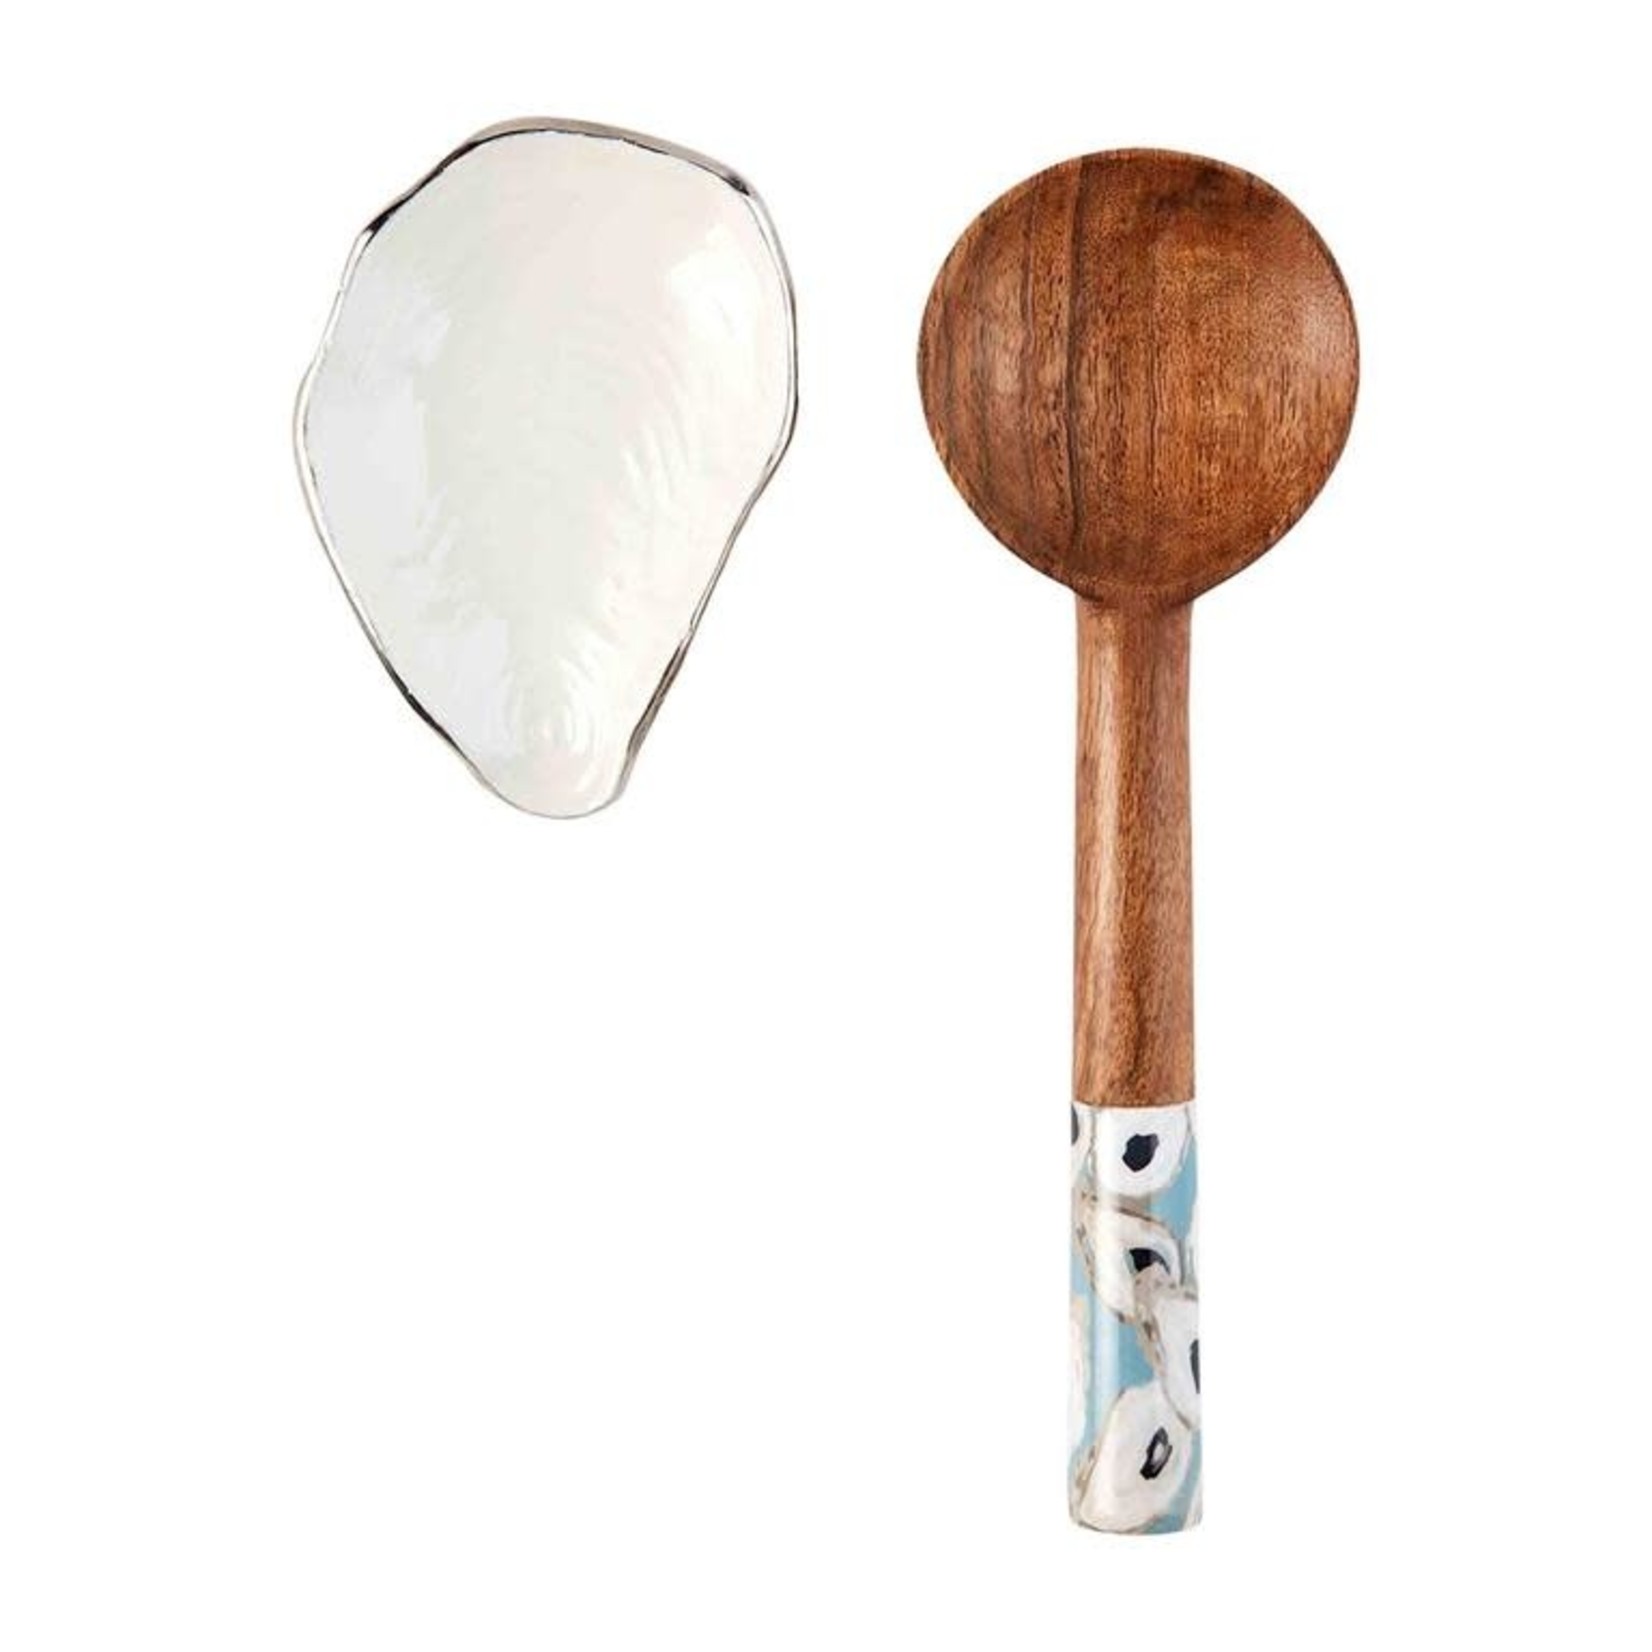 Outside The Box 11" Mango Wood Spoon & Ceramic Oyster Rest Dish